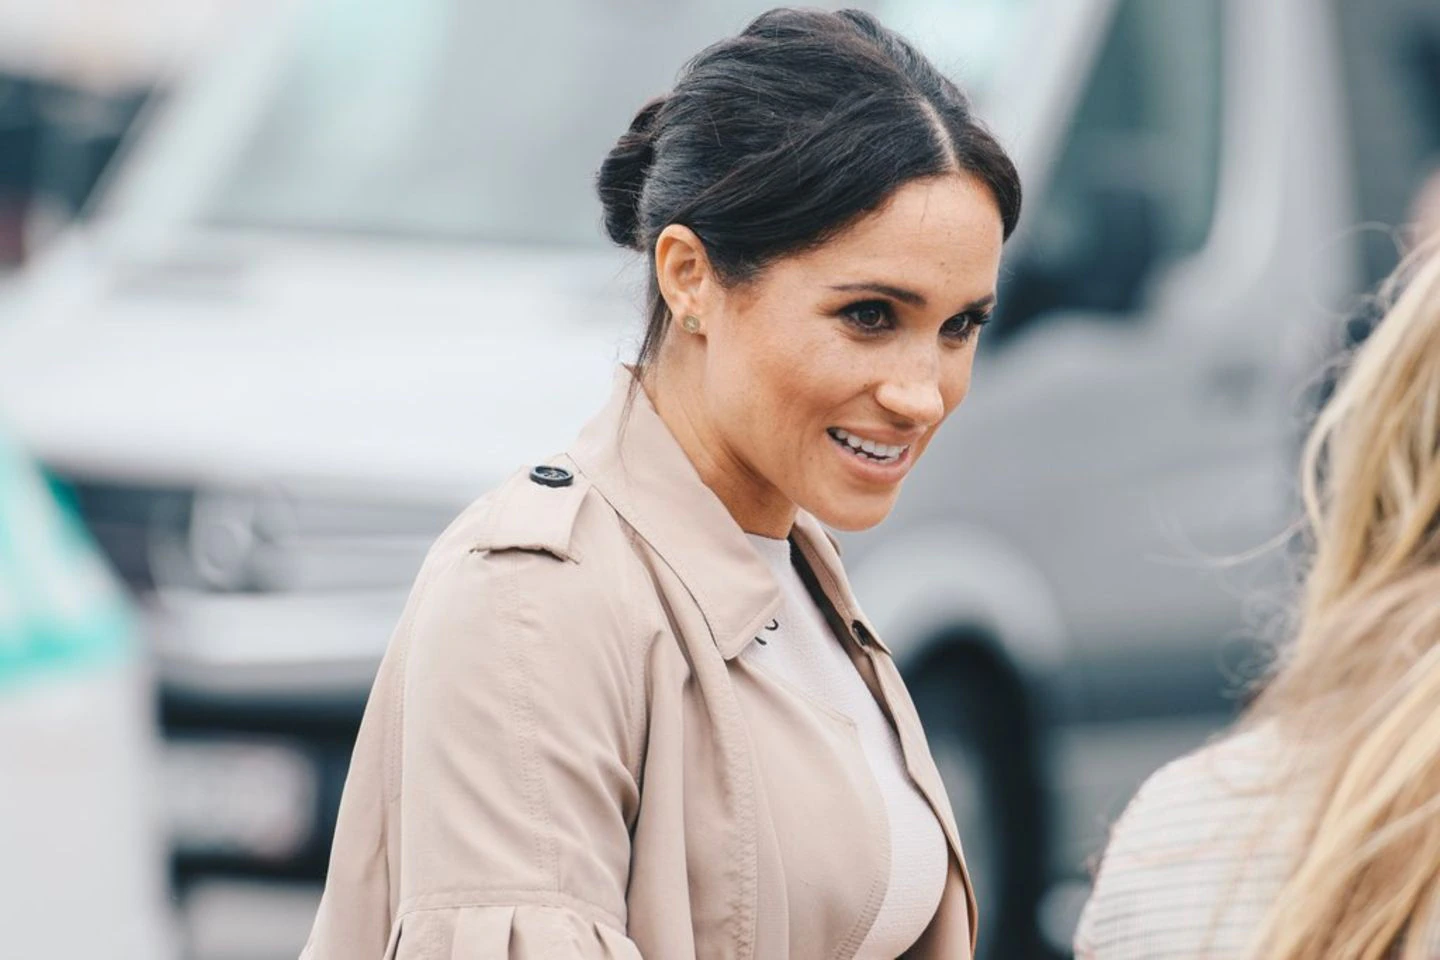 Duchess Meghan's new podcast project is off to a great start.